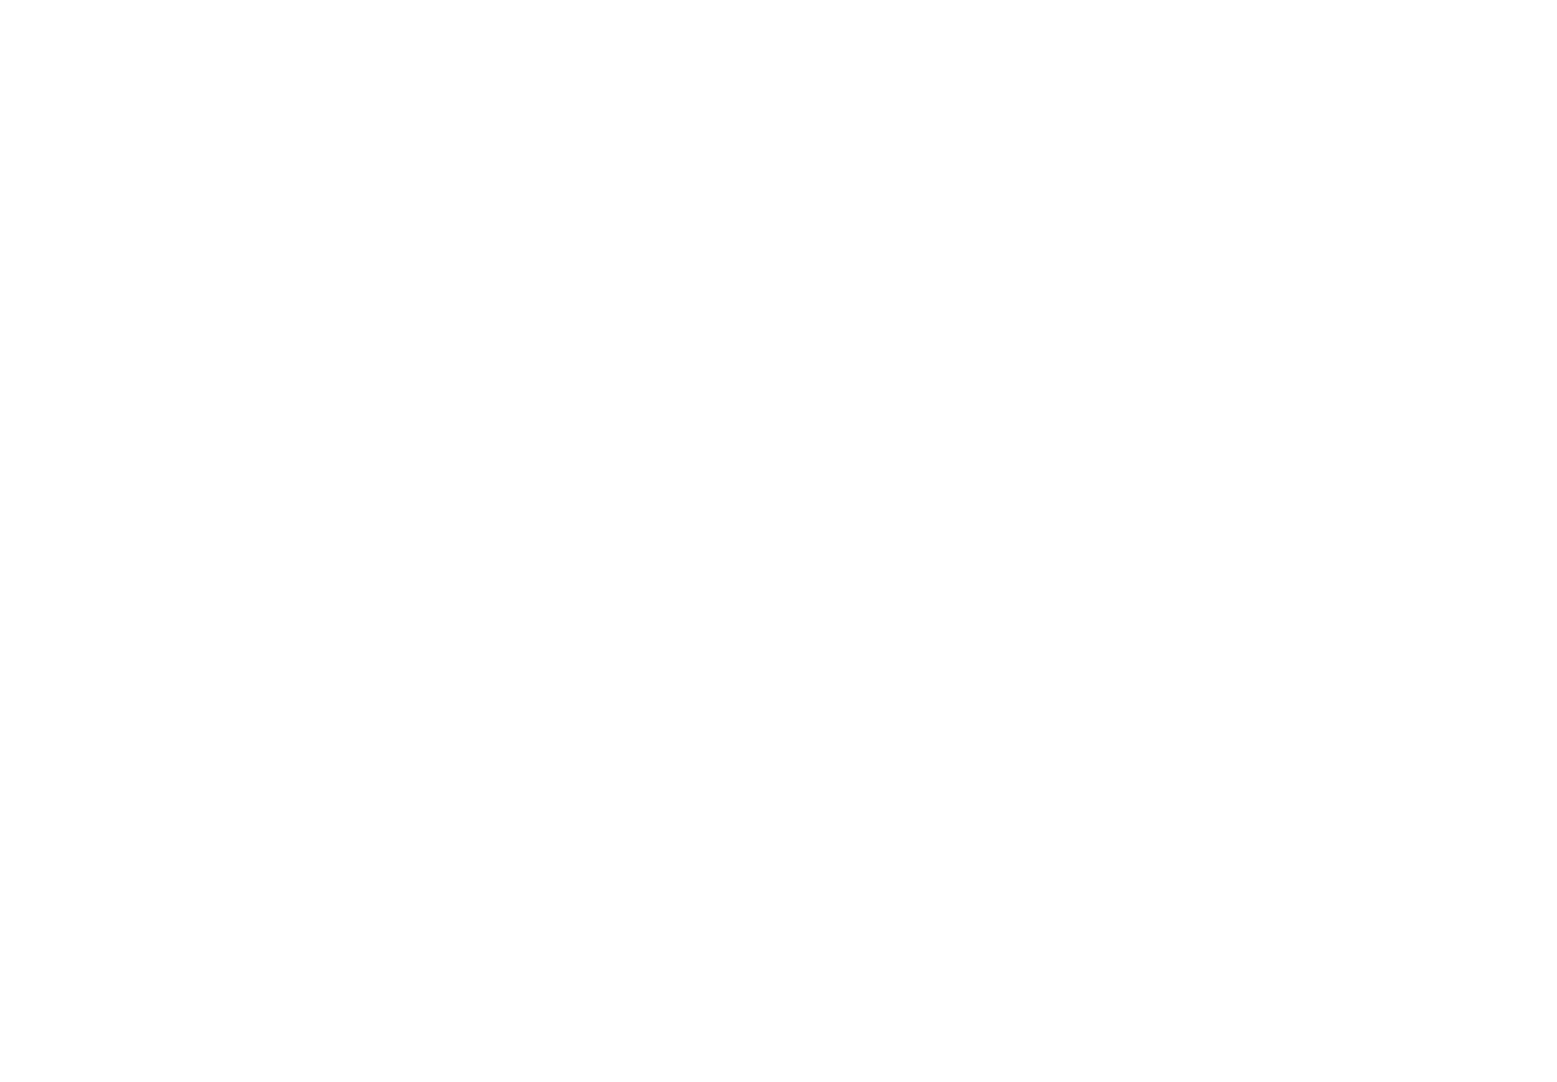 Consolidated Water logo for dark backgrounds (transparent PNG)